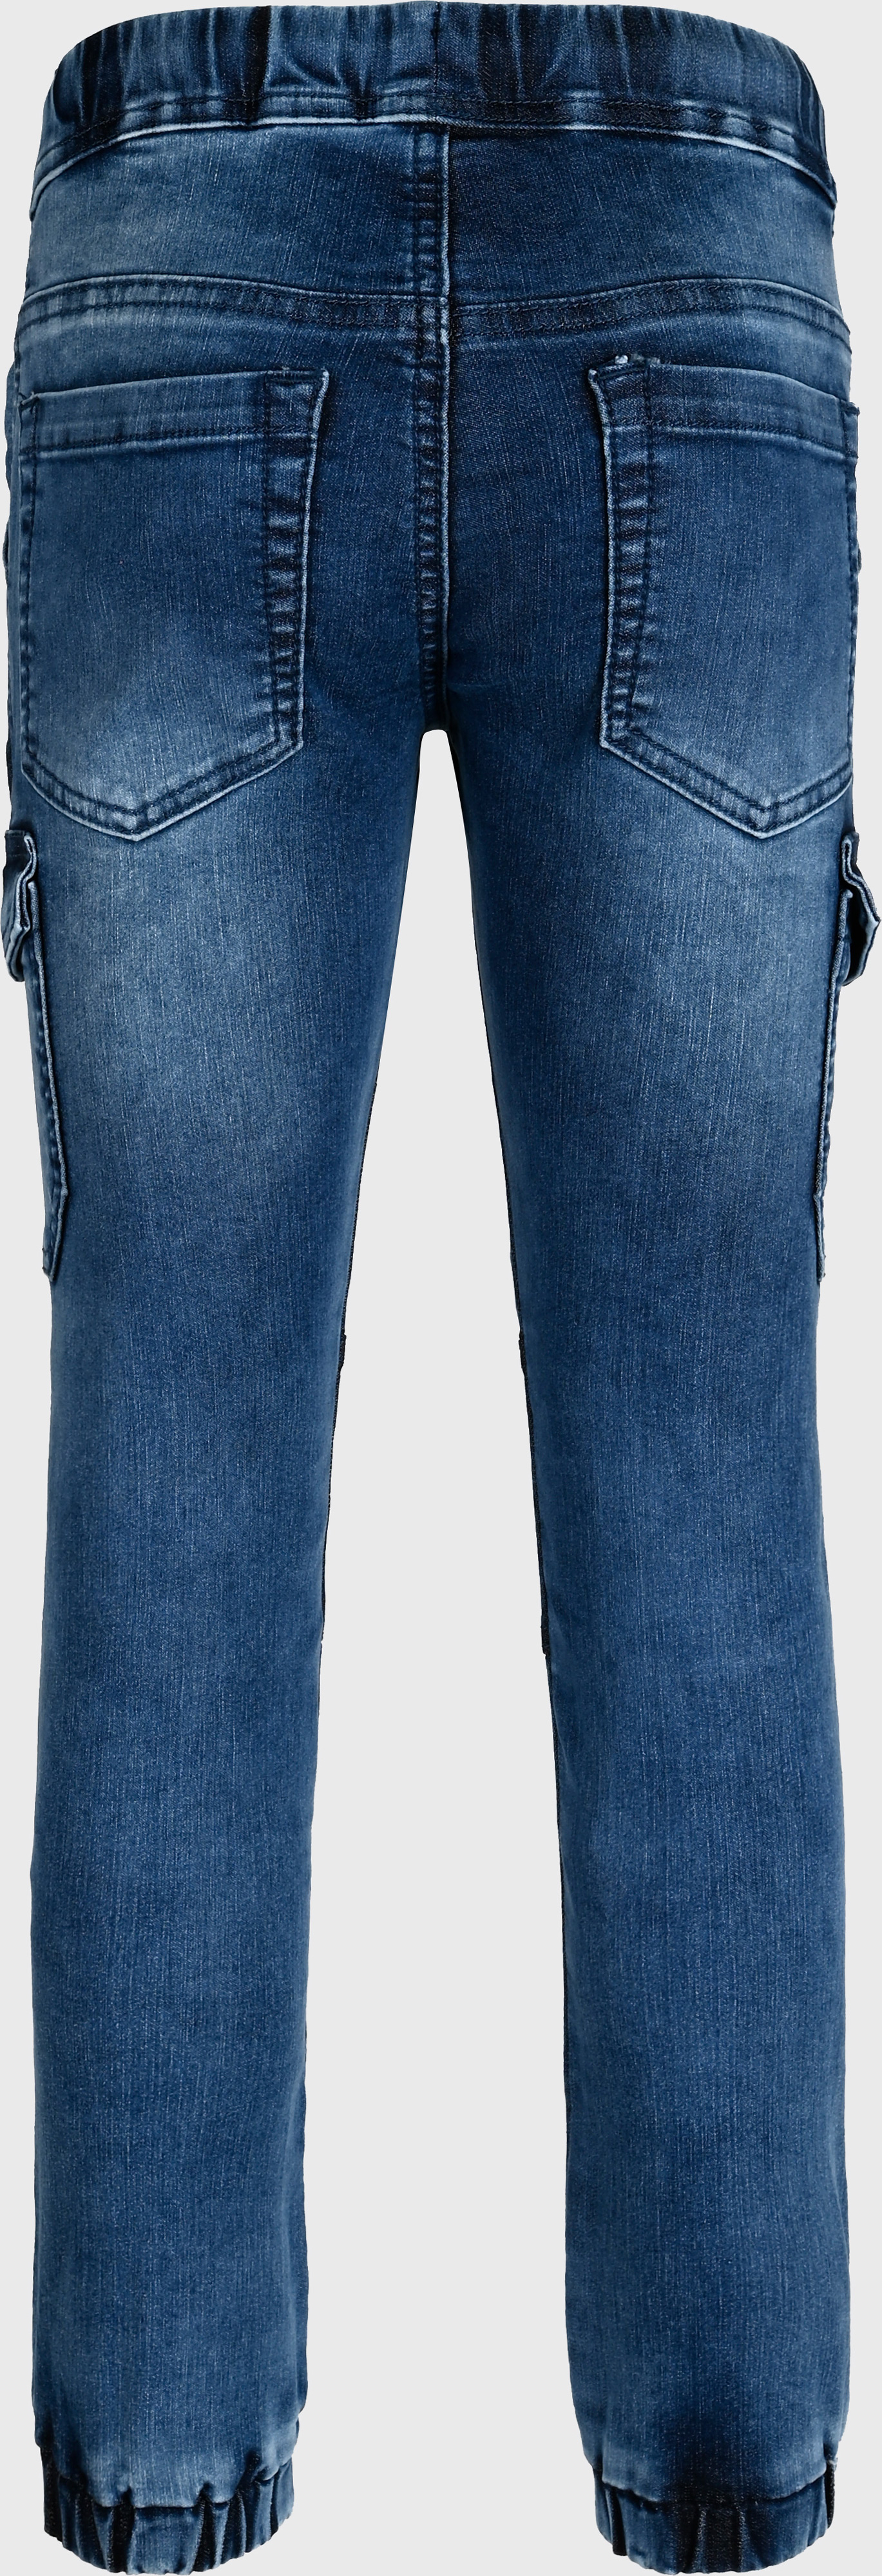 2812-Boys Cargo Jeans Ultrastretch, available in Slim,Normal,Wide